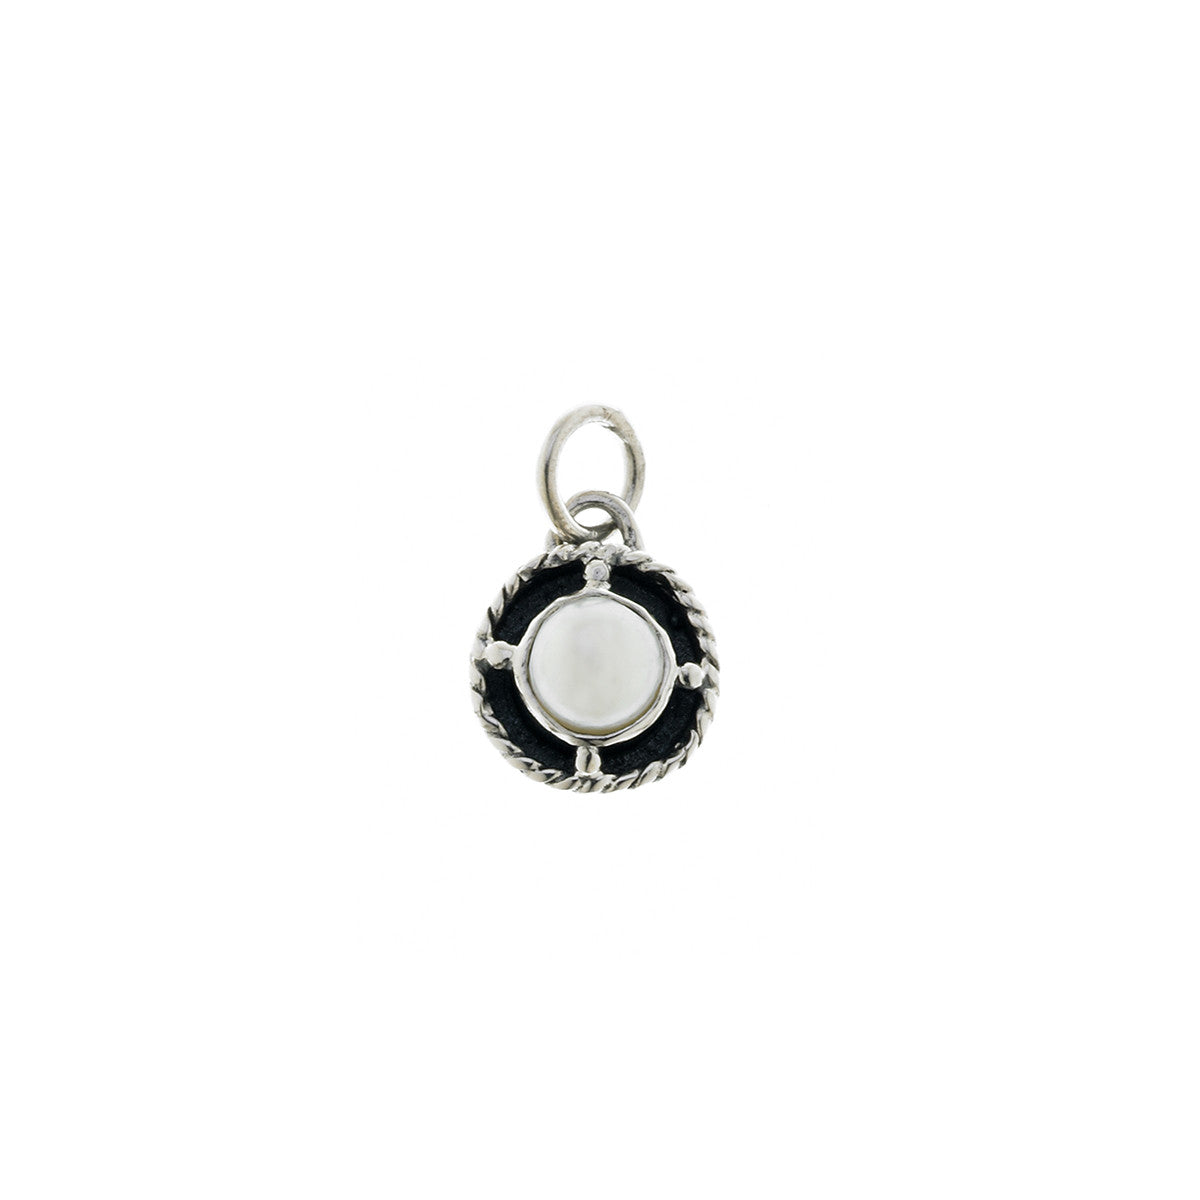 Kamon Sterling Silver And White Pearl June Charm - Cynthia Gale New York Jewelry